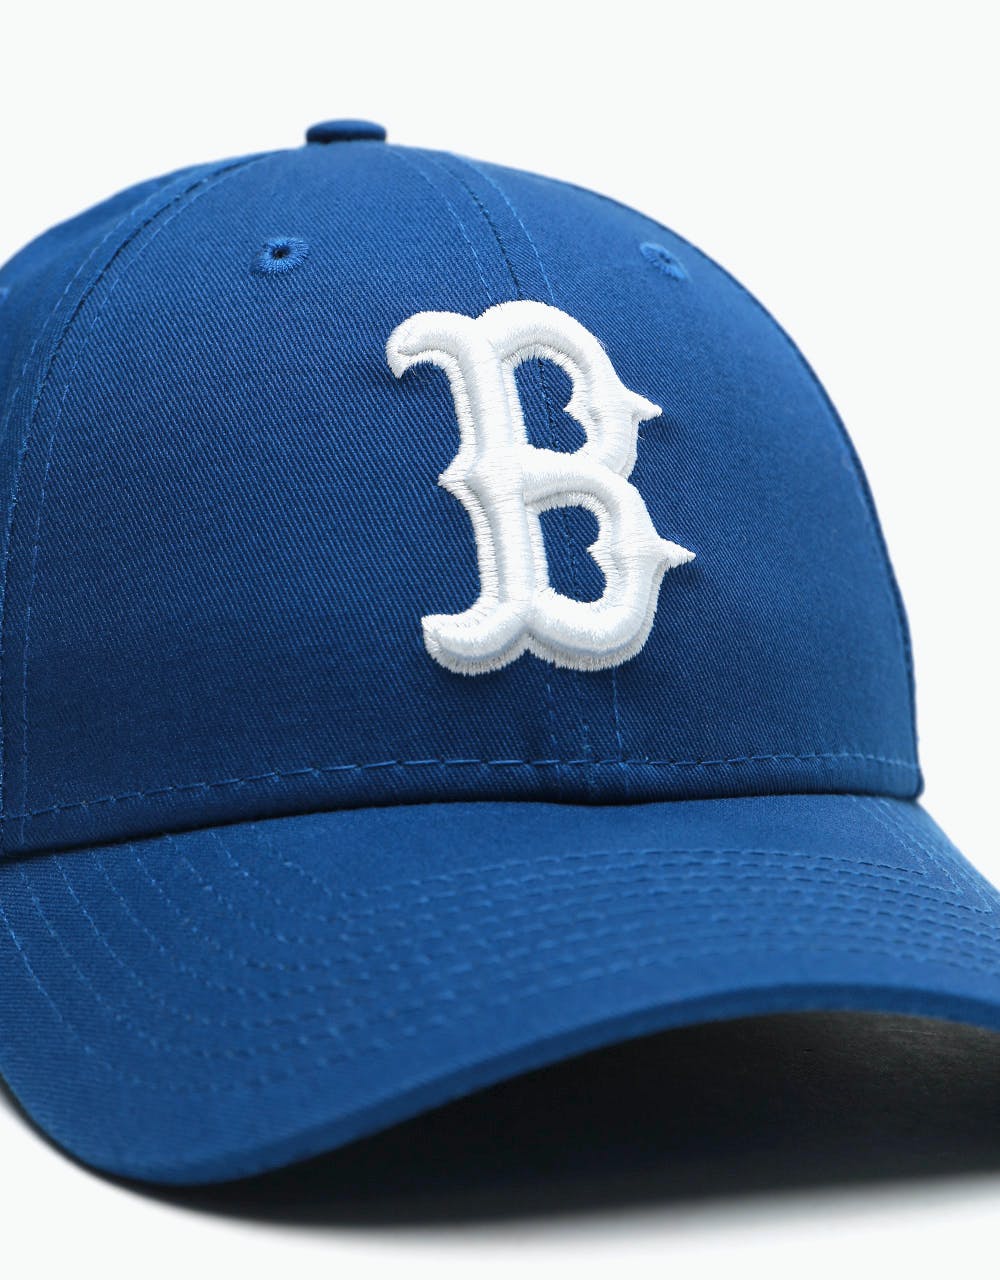 New Era 9Forty Boston Red Sox League Essential Cap - Royal Blue